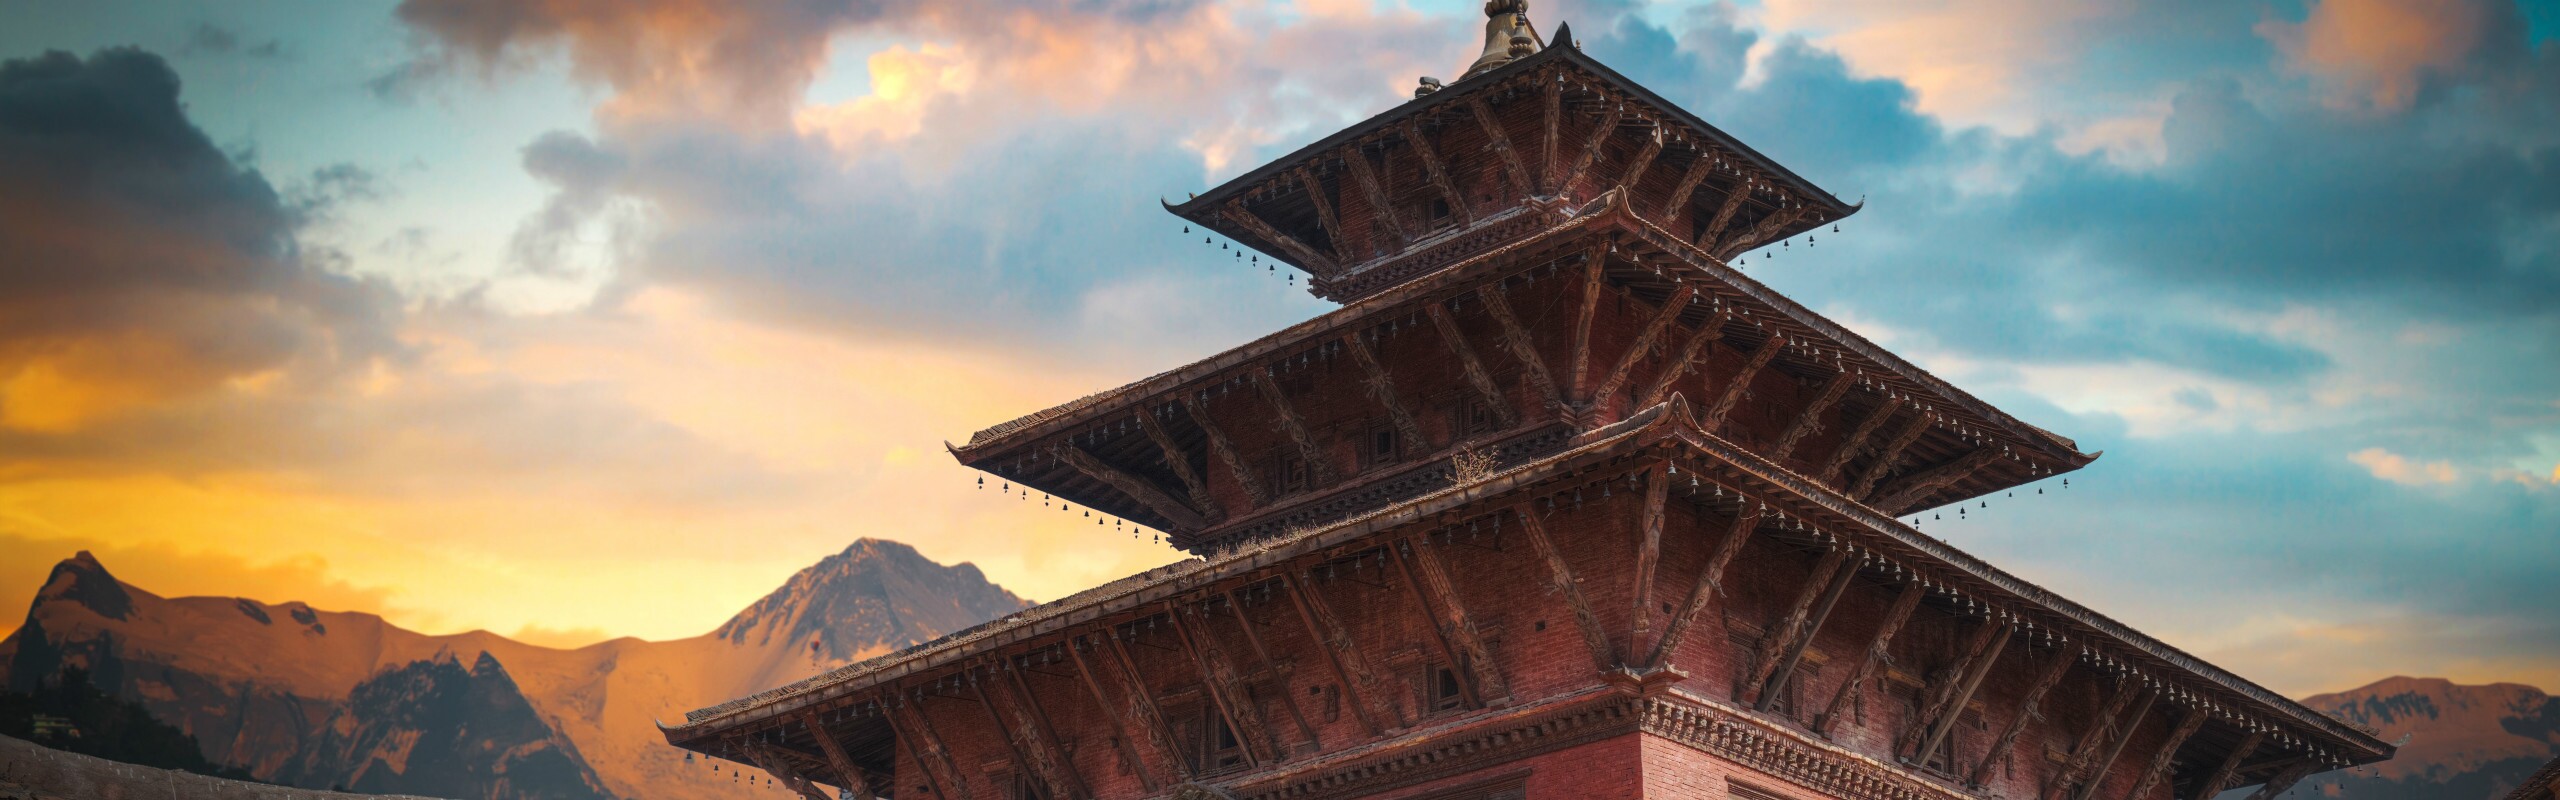 How to Plan a Trip to Nepal 